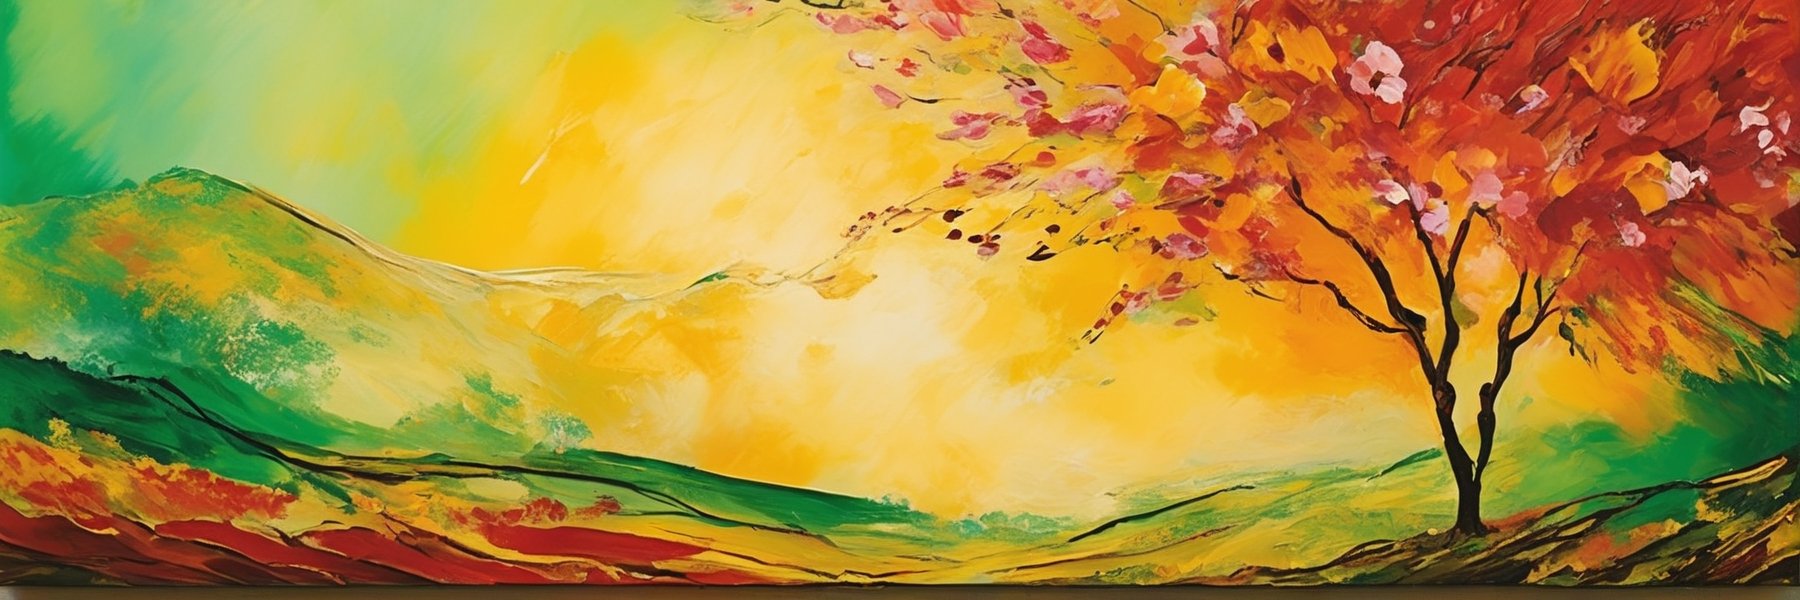 Bathed in the vibrant hues of a burgeoning spring, this abstract masterpiece channels the artistic spirits of Gauguin and Van Gogh, infusing their styles into a contemporary vision. Imagine a swirling symphony of colors, where bold strokes evoke the dynamism of life awakening. A surreal landscape unfolds, merging dreamlike elements with nature's renewal. Canvased warmth exudes from golden yellows and fiery reds, mirroring the passion of spring's rebirth. Wisps of azure and emerald suggest the delicate dance of blossoms, while the texture captures the essence of the season's unpredictability. This artwork embodies the fusion of timeless inspiration and modern expression, a celebration of the eternal beauty found in the awakening of spring.,ink 